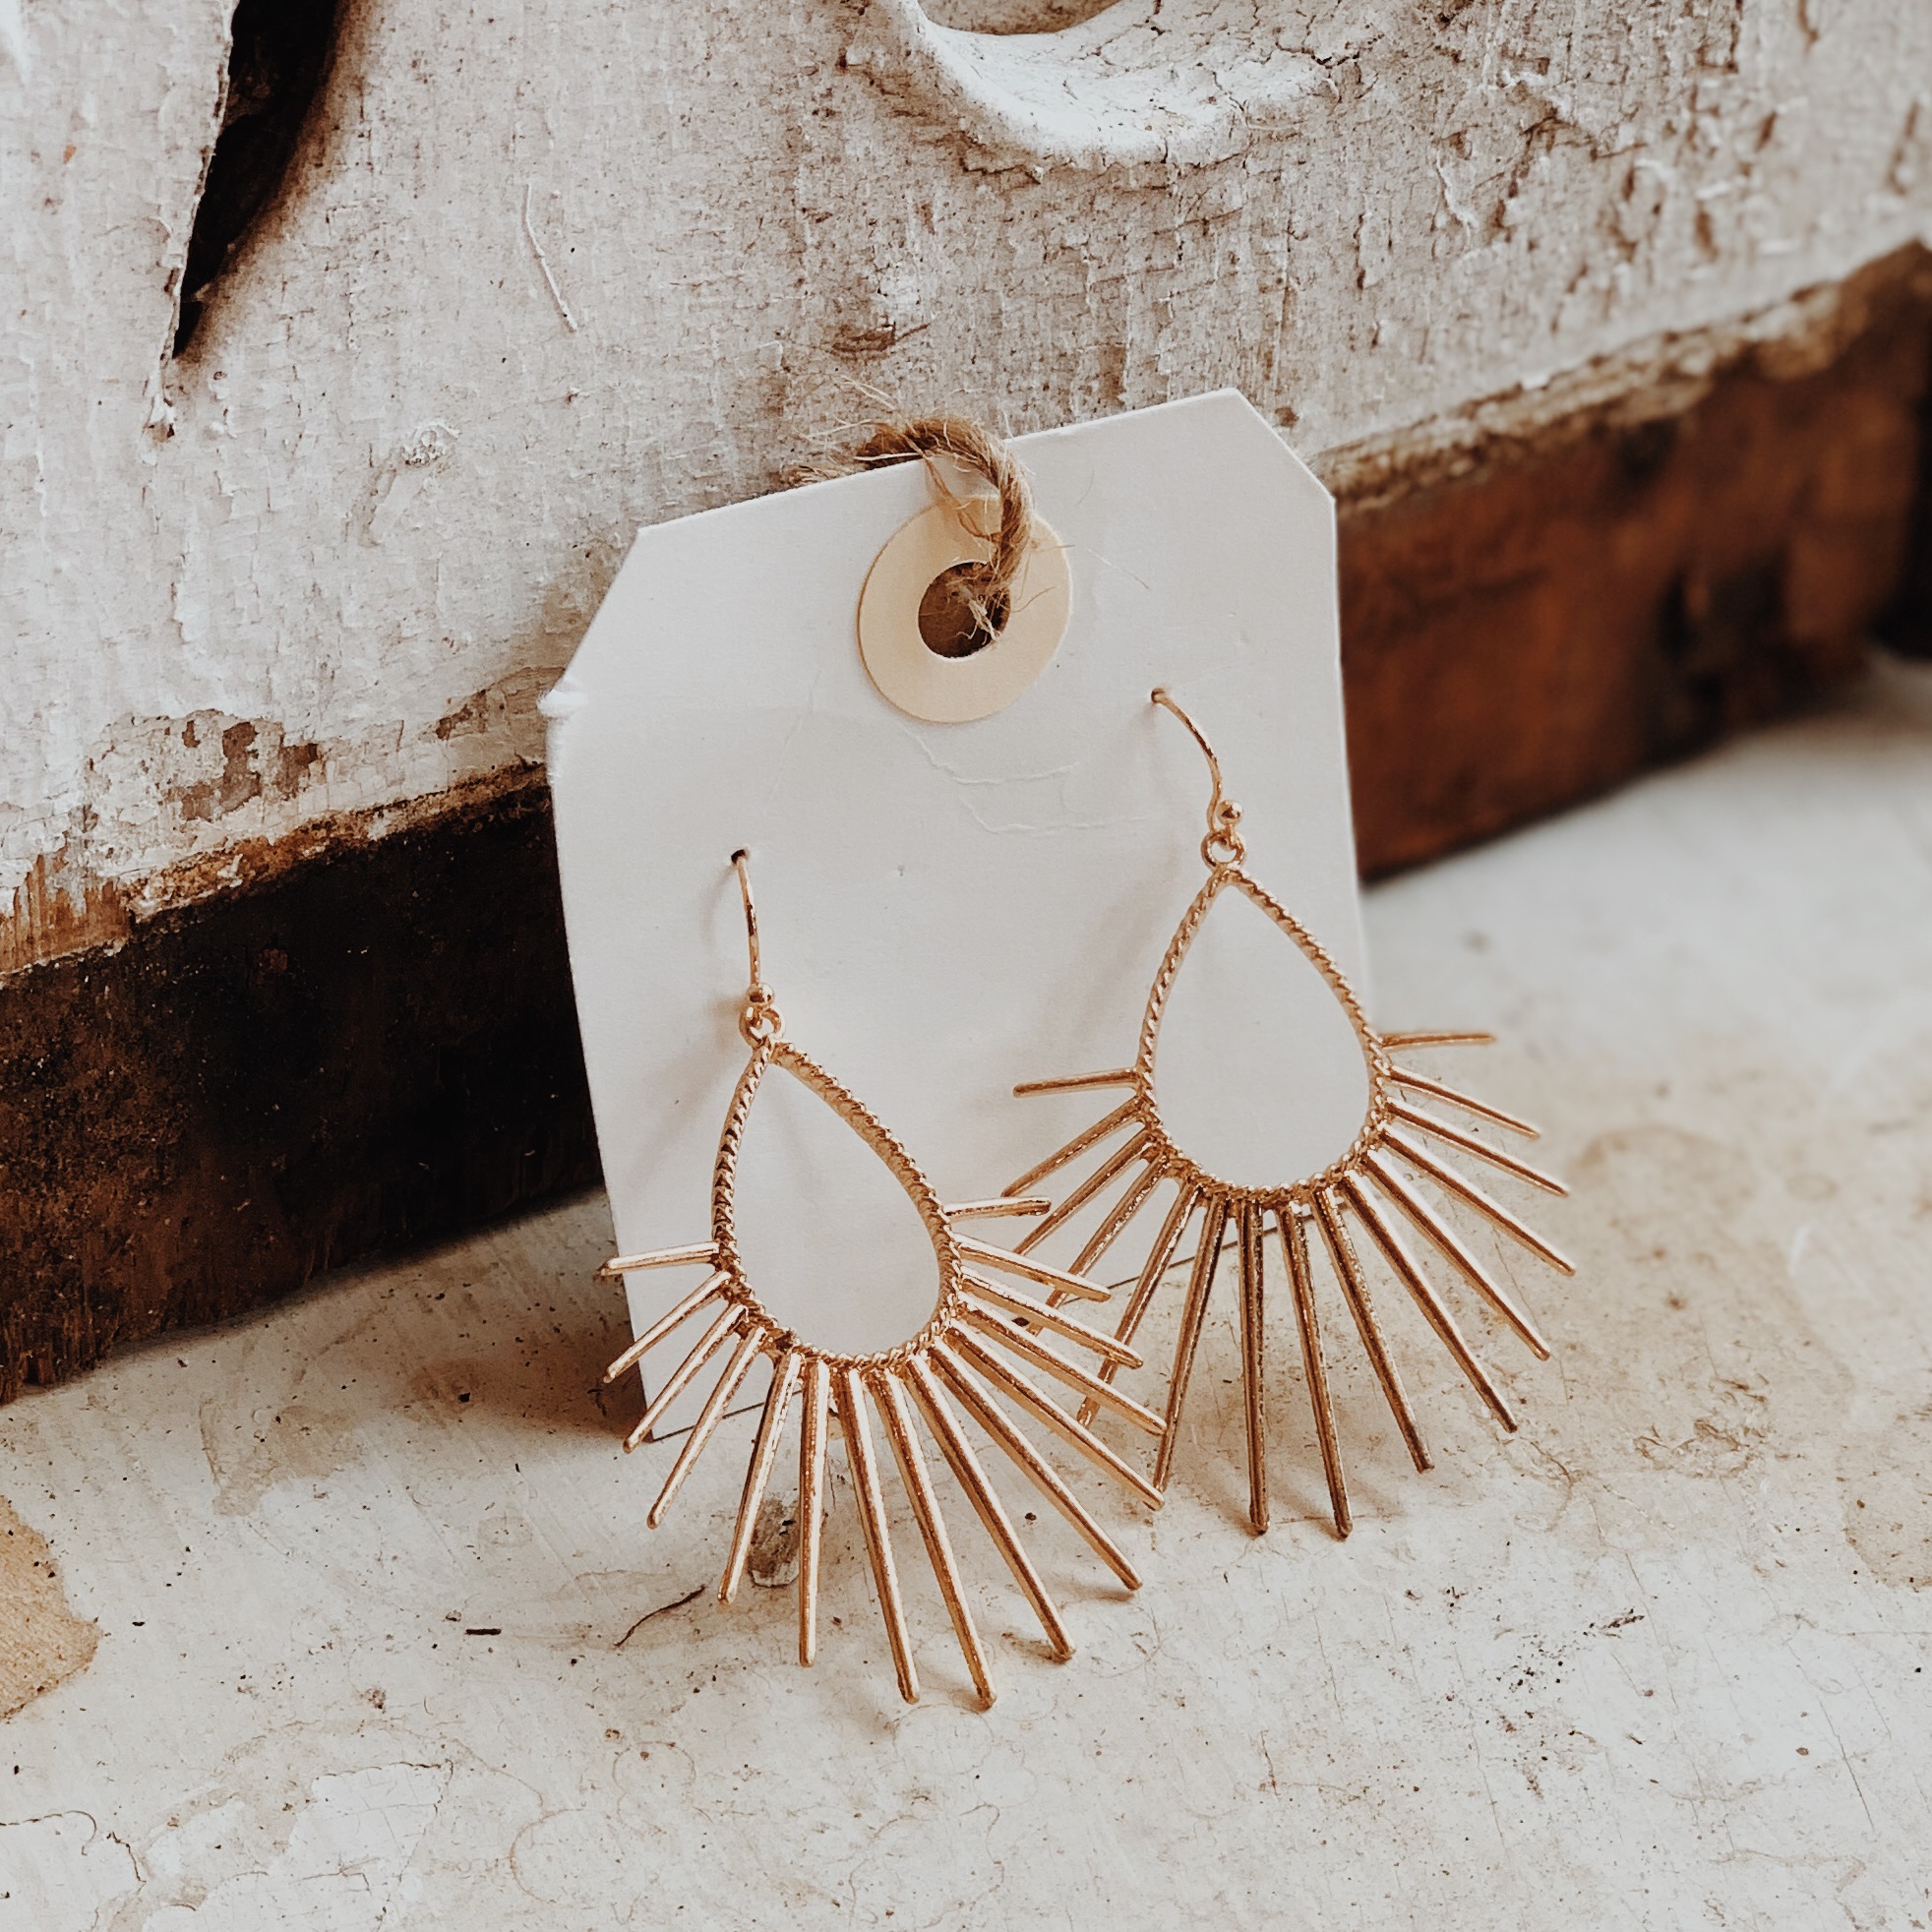 These gorgeous earrings measure about 2.5 inches long!